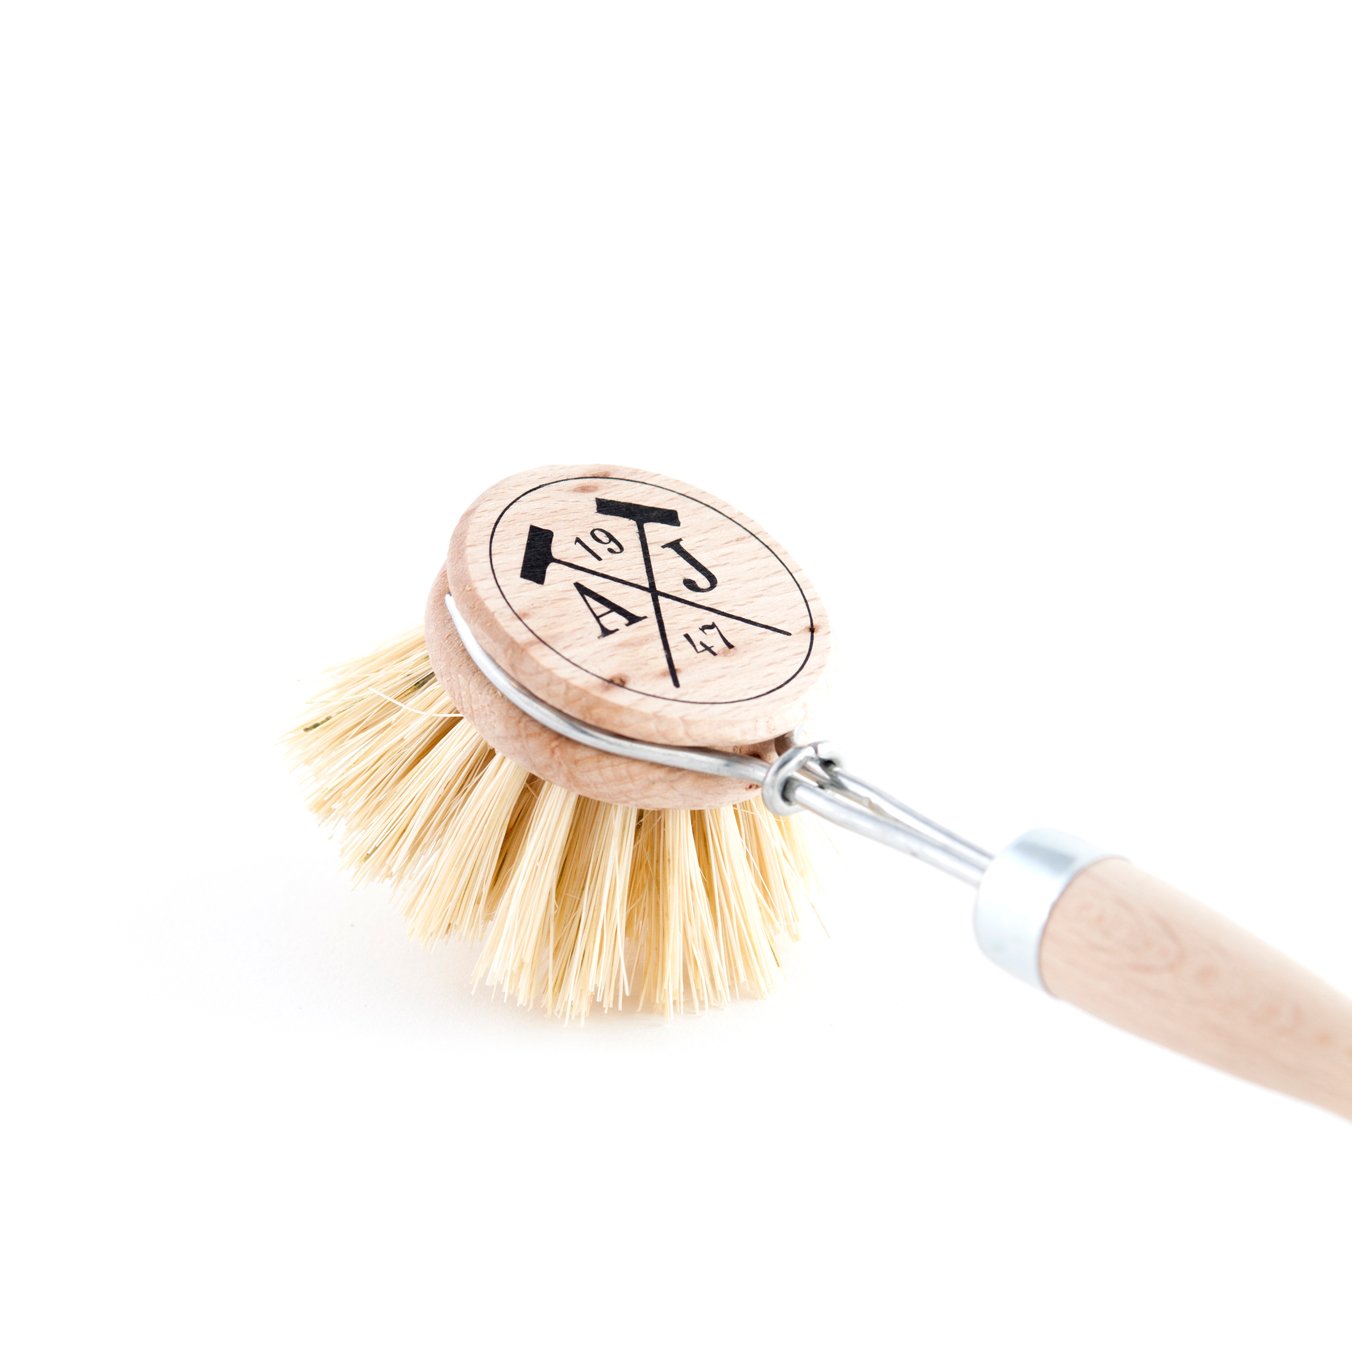 Andrée Jardin Tradition Handled Dish Brush (Set of 2) – French Dry Goods